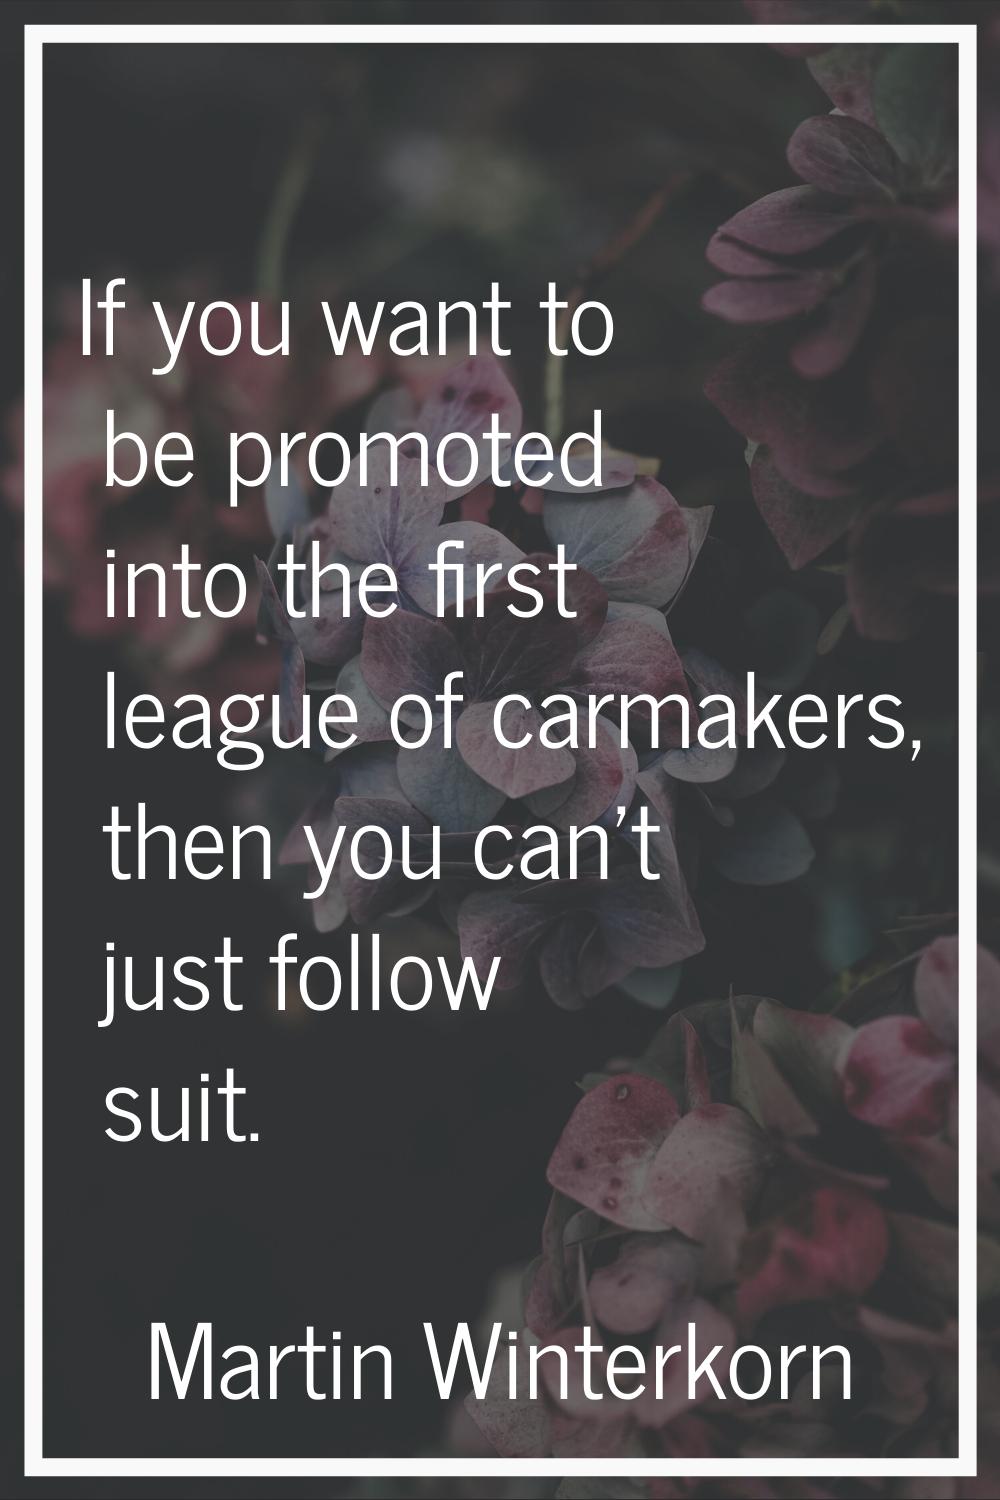 If you want to be promoted into the first league of carmakers, then you can't just follow suit.